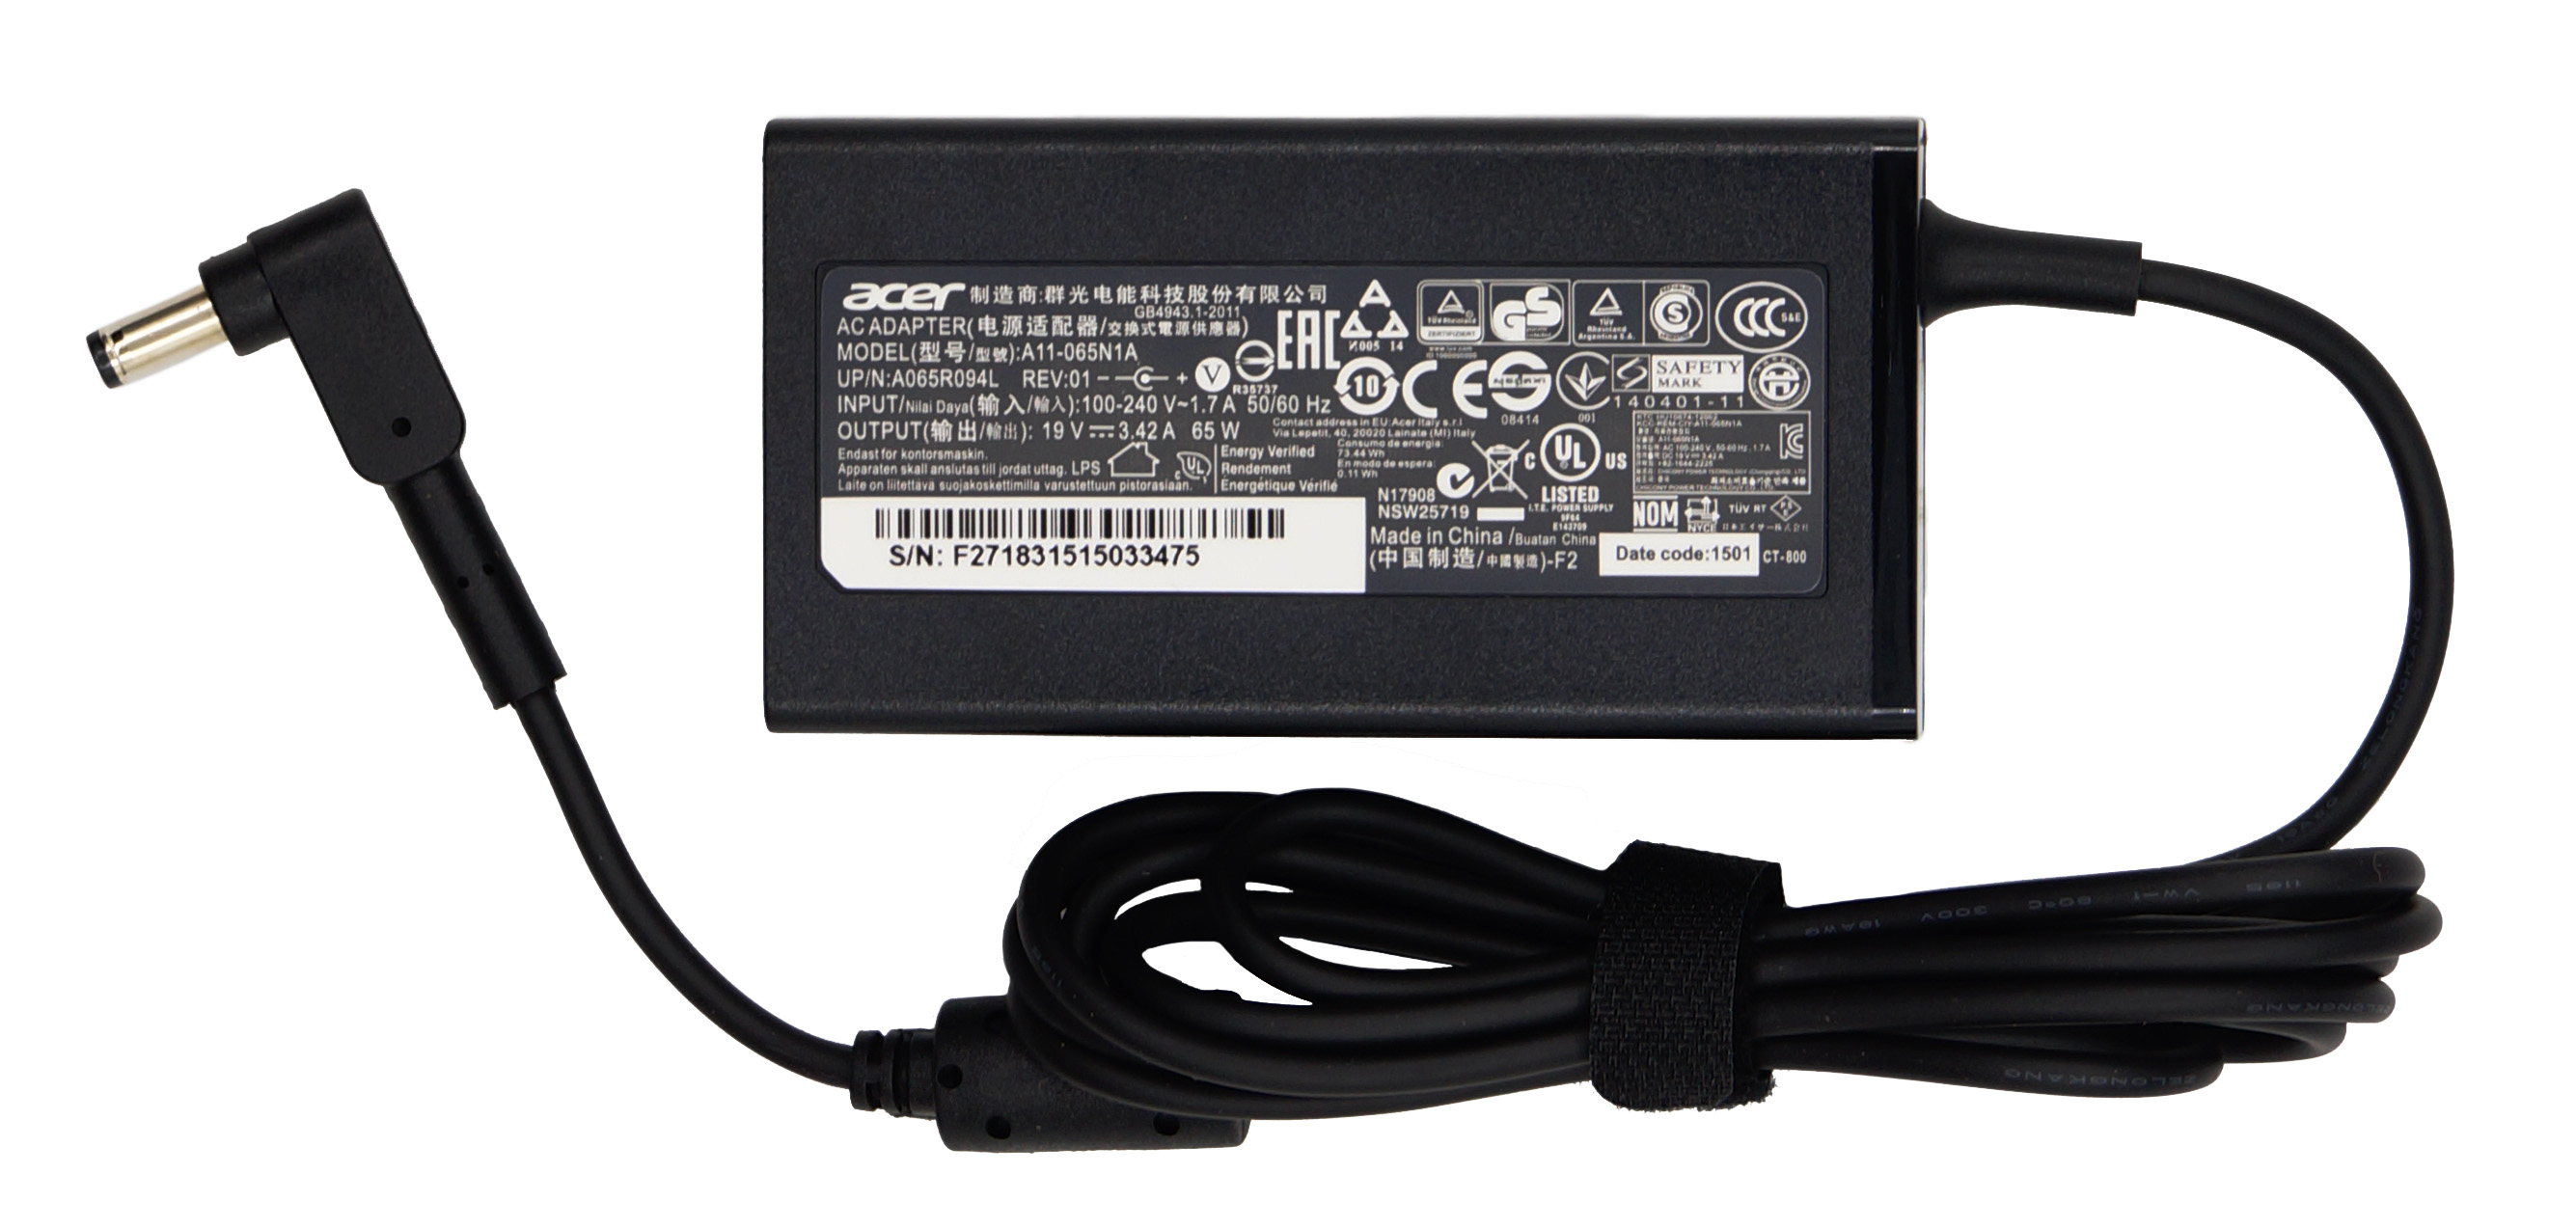   Acer 5.5x1.7, 65W (19V, 3.42A) ORG (new type)